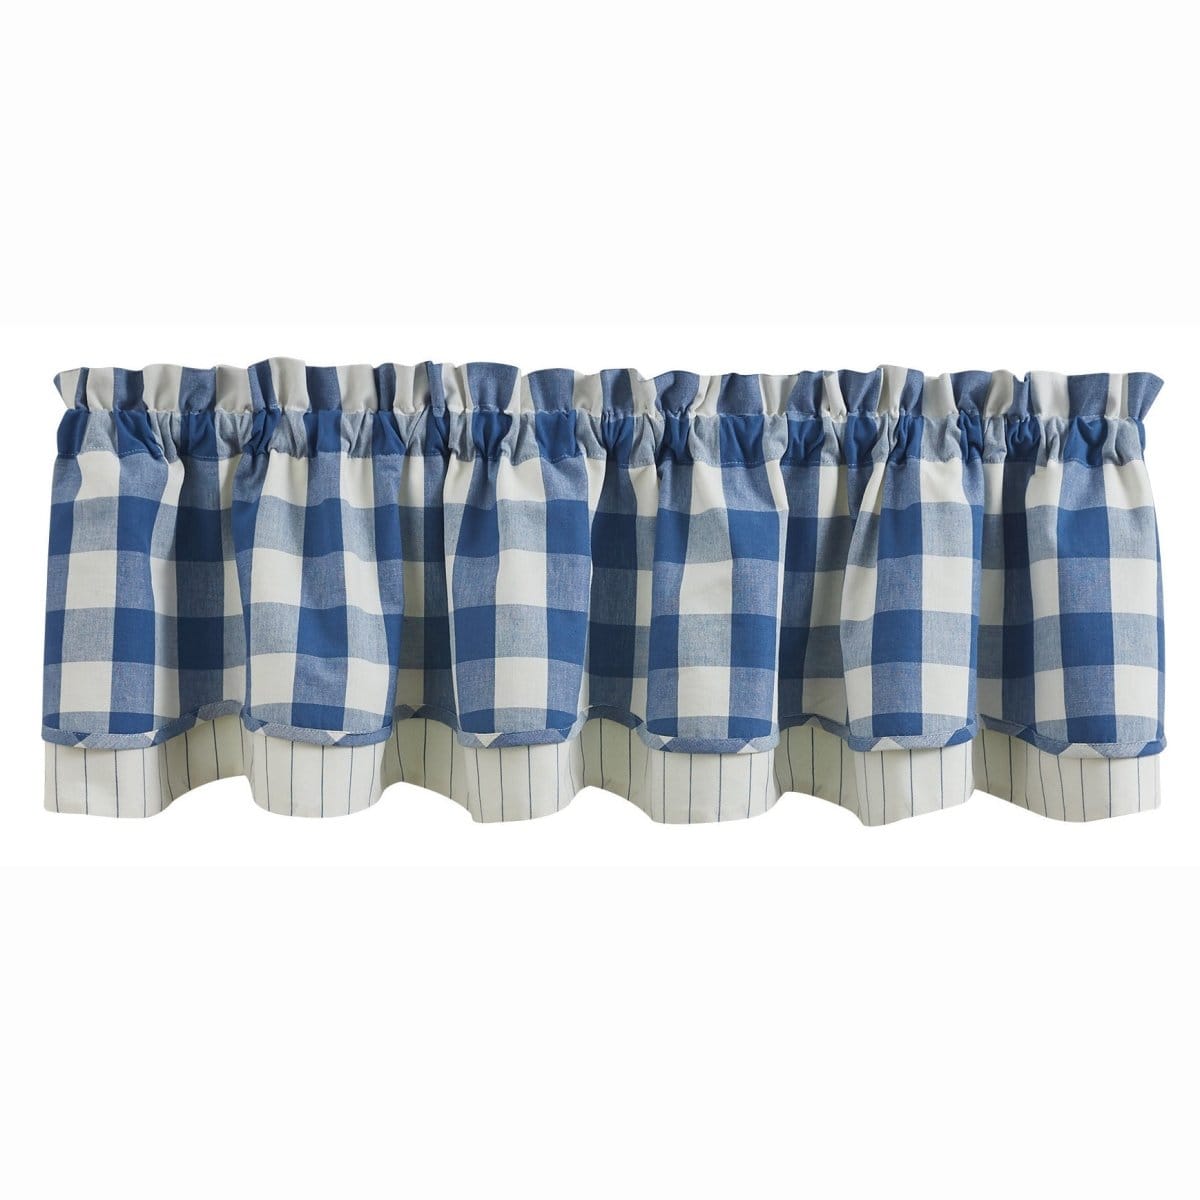 Wicklow Check in China Blue Layered Valance Lined-Park Designs-The Village Merchant